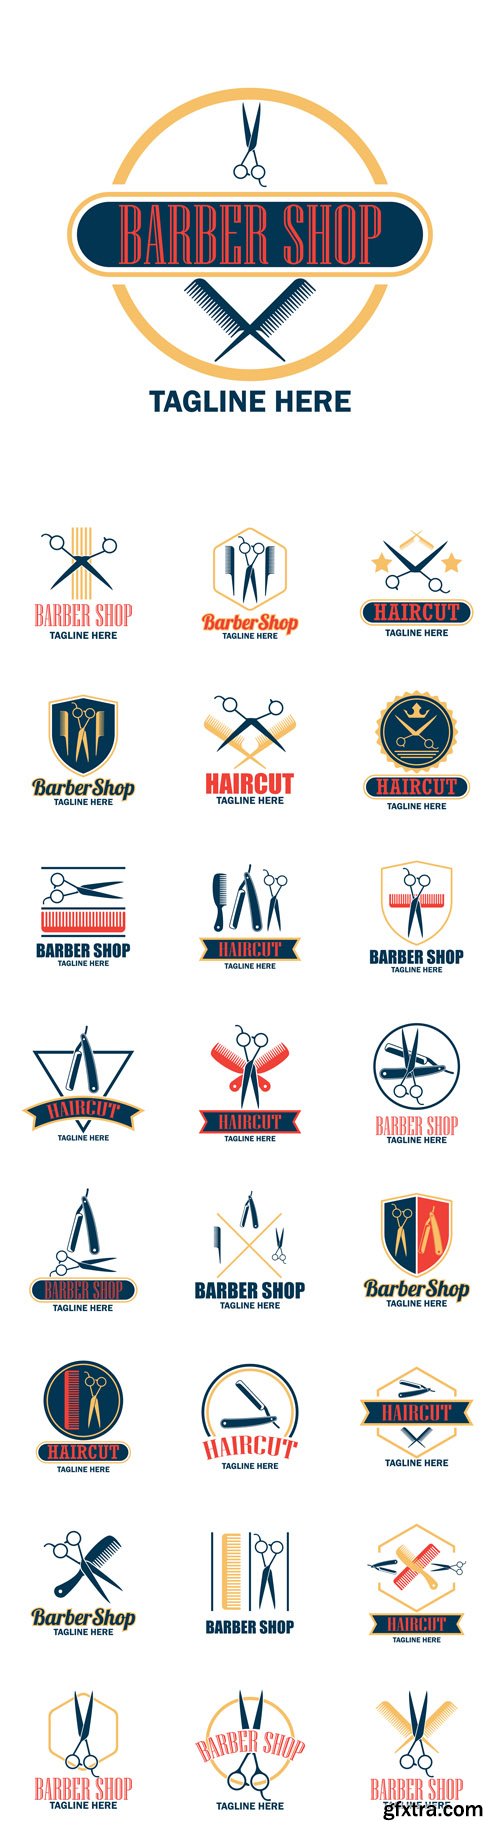 Vector Set - Barber Shop Logos with Text Space for Your Slogan or Tagline